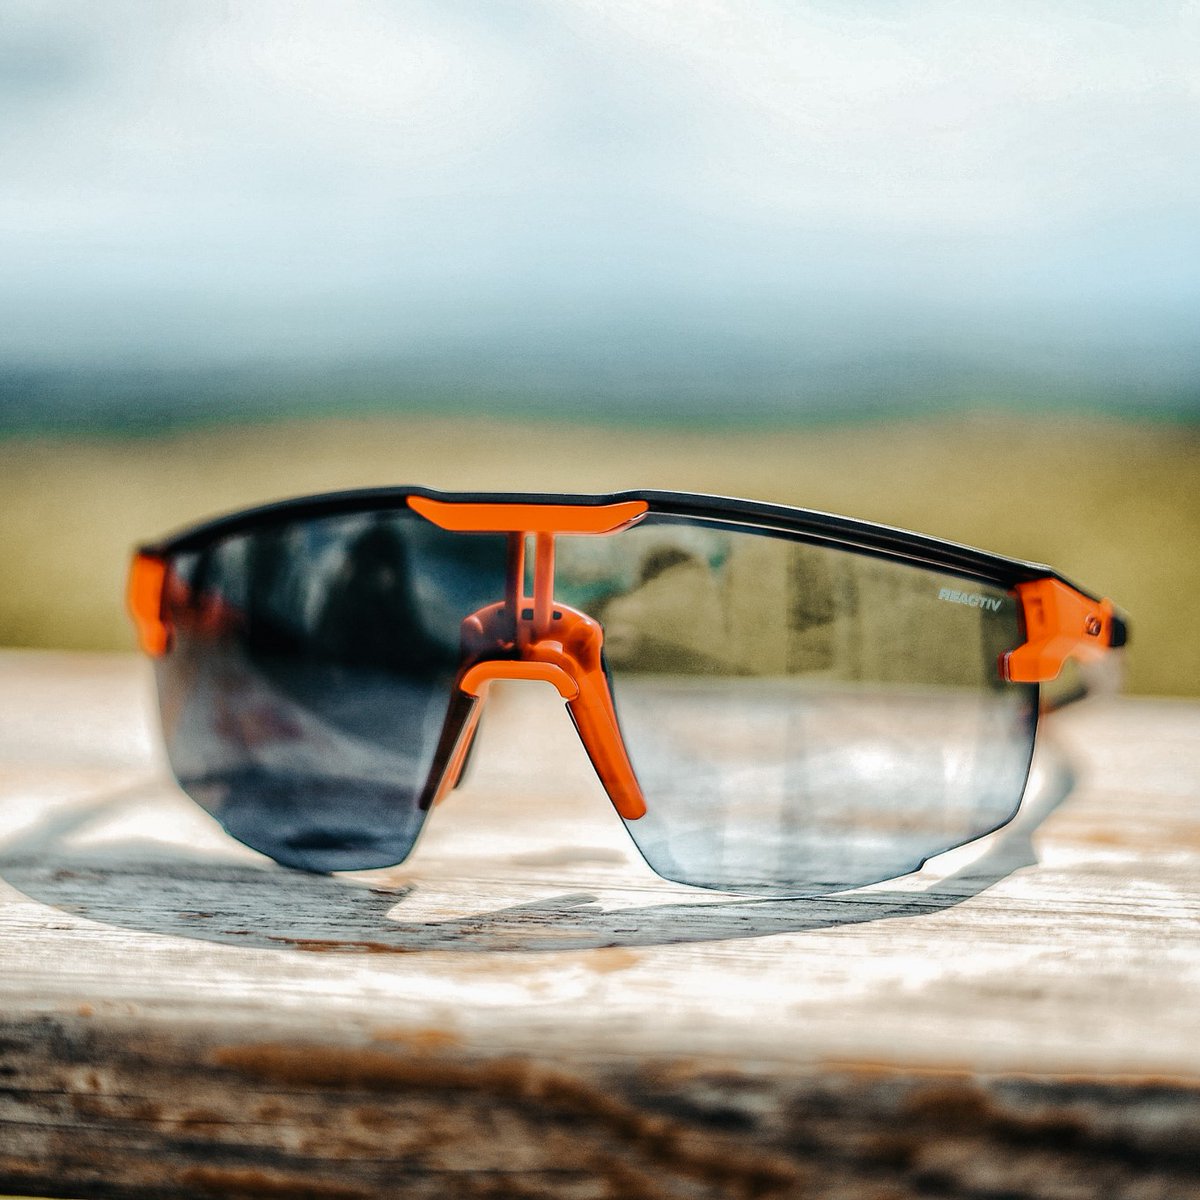 Inspired by the outdoors, meet the Ultimate Sunglasses that will give you protection and visual confort thanks to REACTIV Photochromic lenses. You'll just need one pair of sunglasses no matter how bright it is and whatever the weather (sunny, cloudy...) Photo by Gregor Strasser